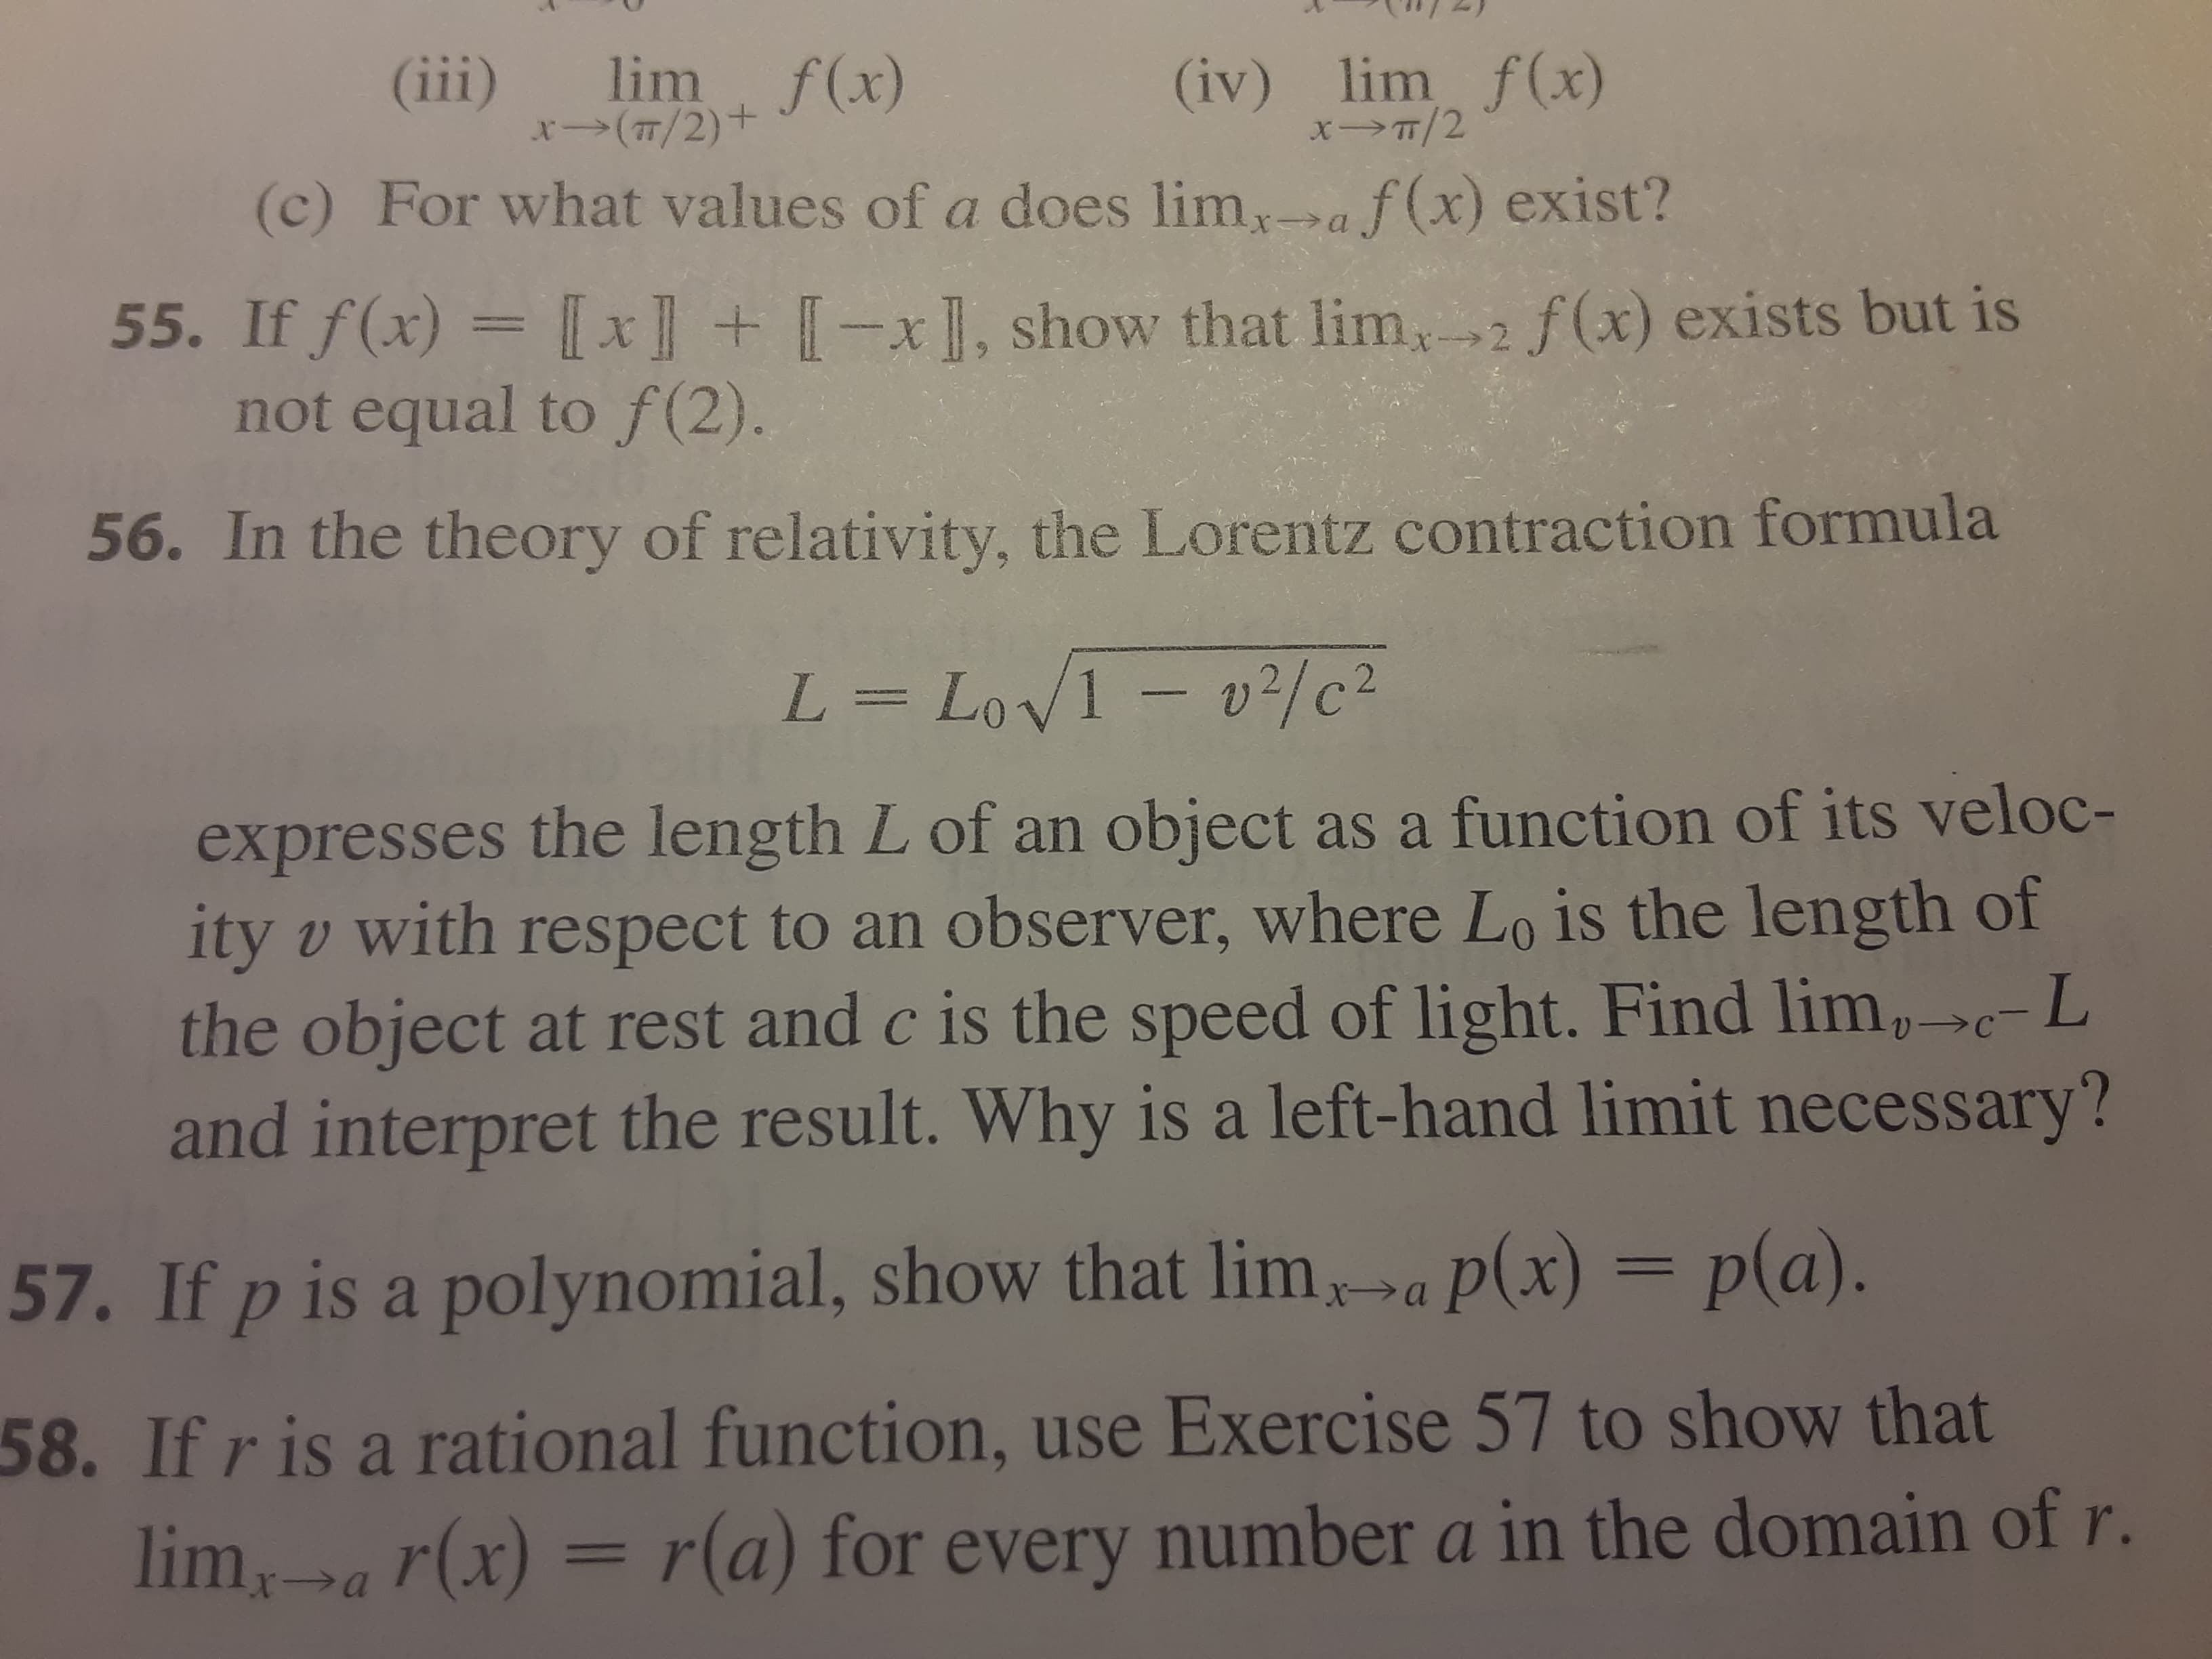 5. In the theory of relativity, the Lorentz contraction formula
L = LoV1 - v2/c2
expresses the length L of an object as a function of its veloc-
ity v with respect to an observer, where Lo is the length of
the object at rest and c is the speed of light. Find lim,c-L
and interpret the result. Why is a left-hand limit necessary?
